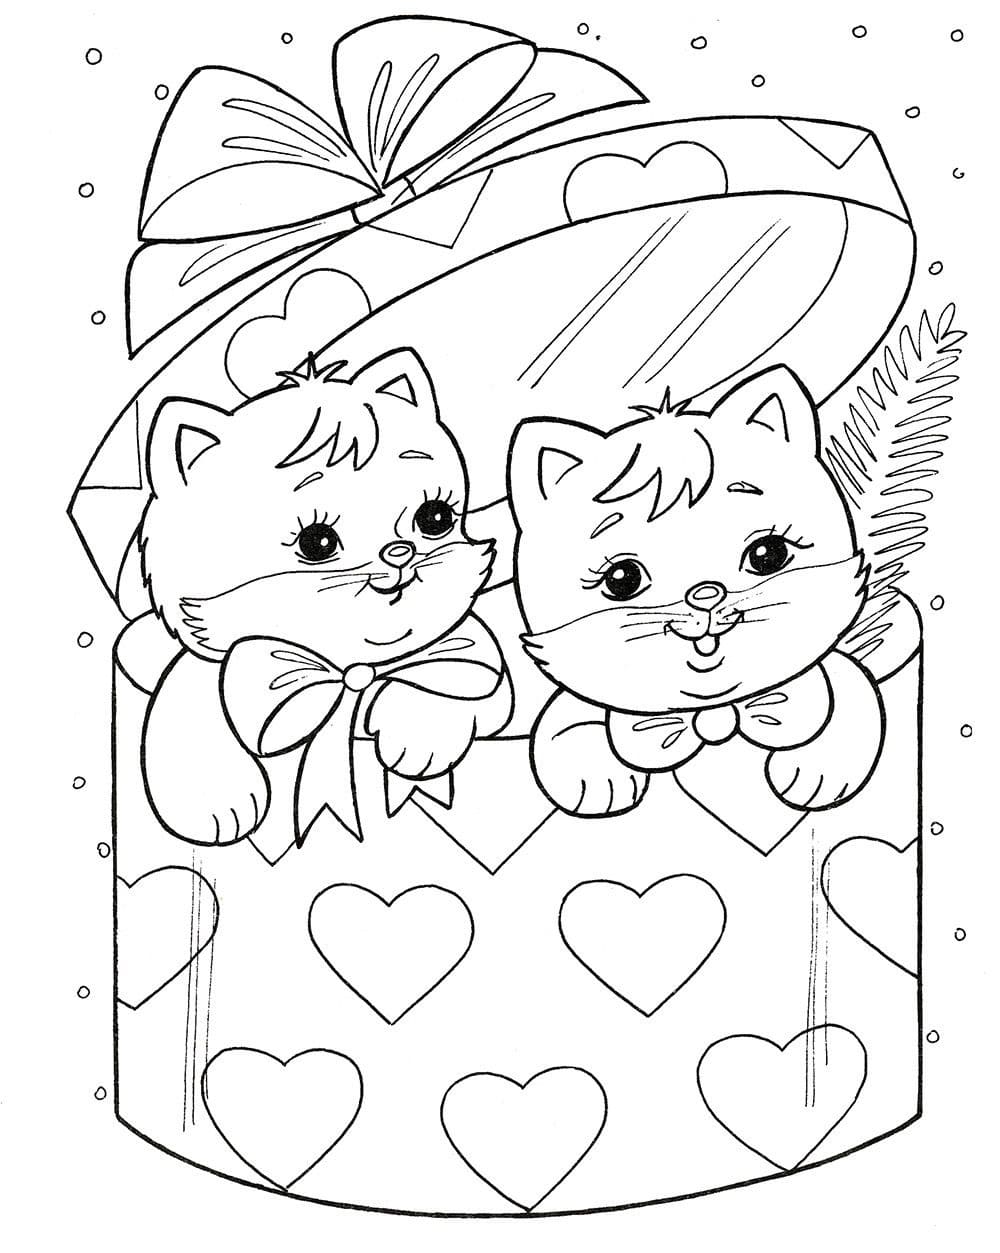 Coloring page Valentine's Day Cats congratulate on February 14